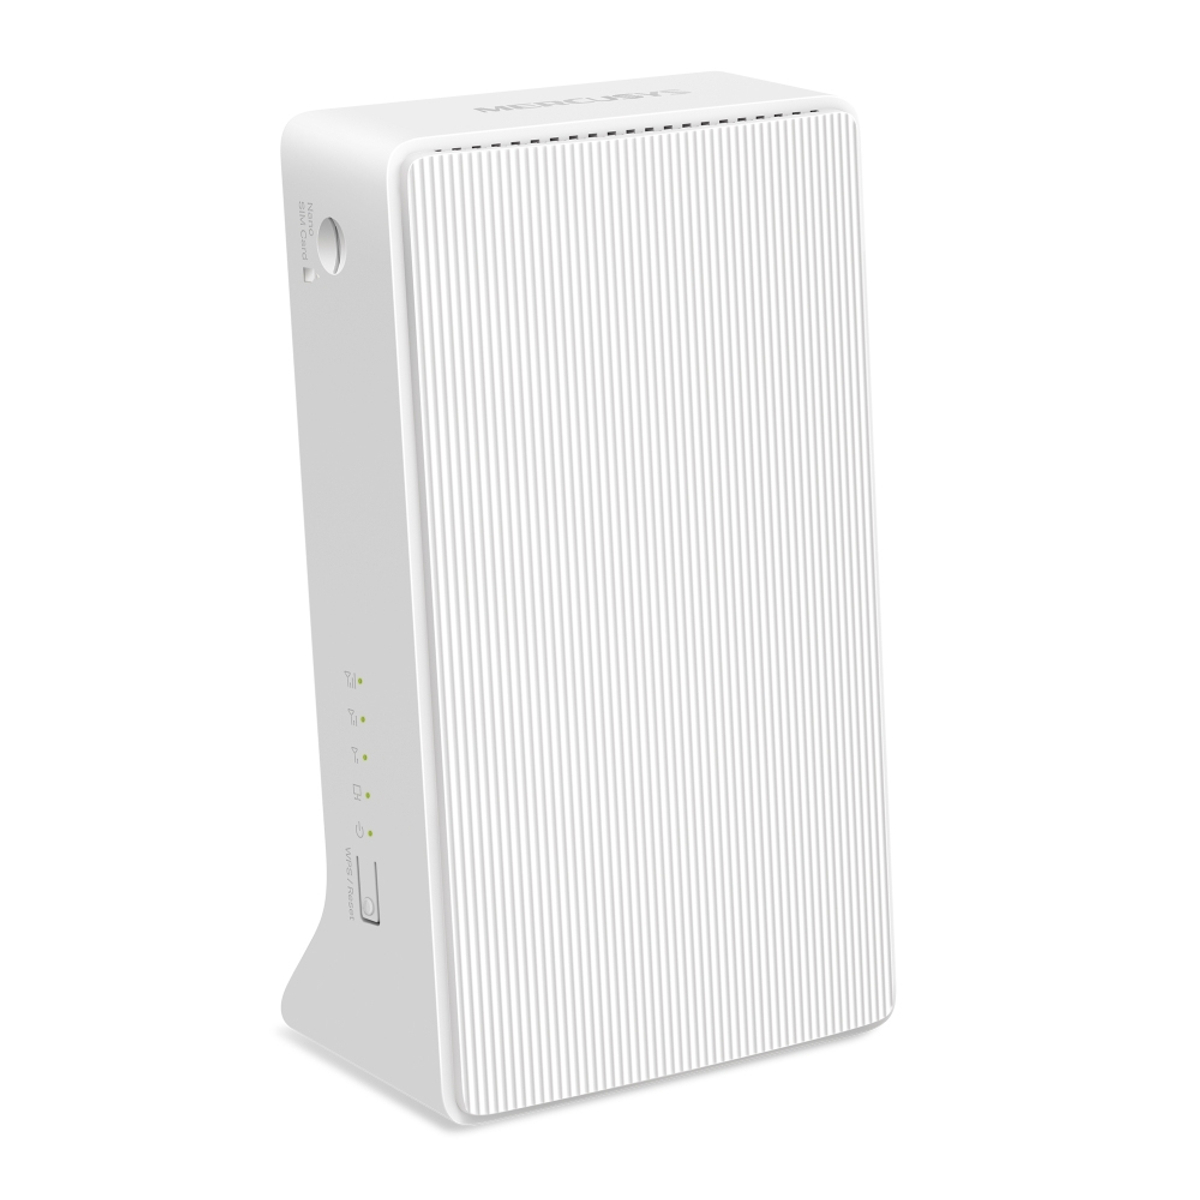 4G+ Cat6 AC1200 Dual Band Gb Router